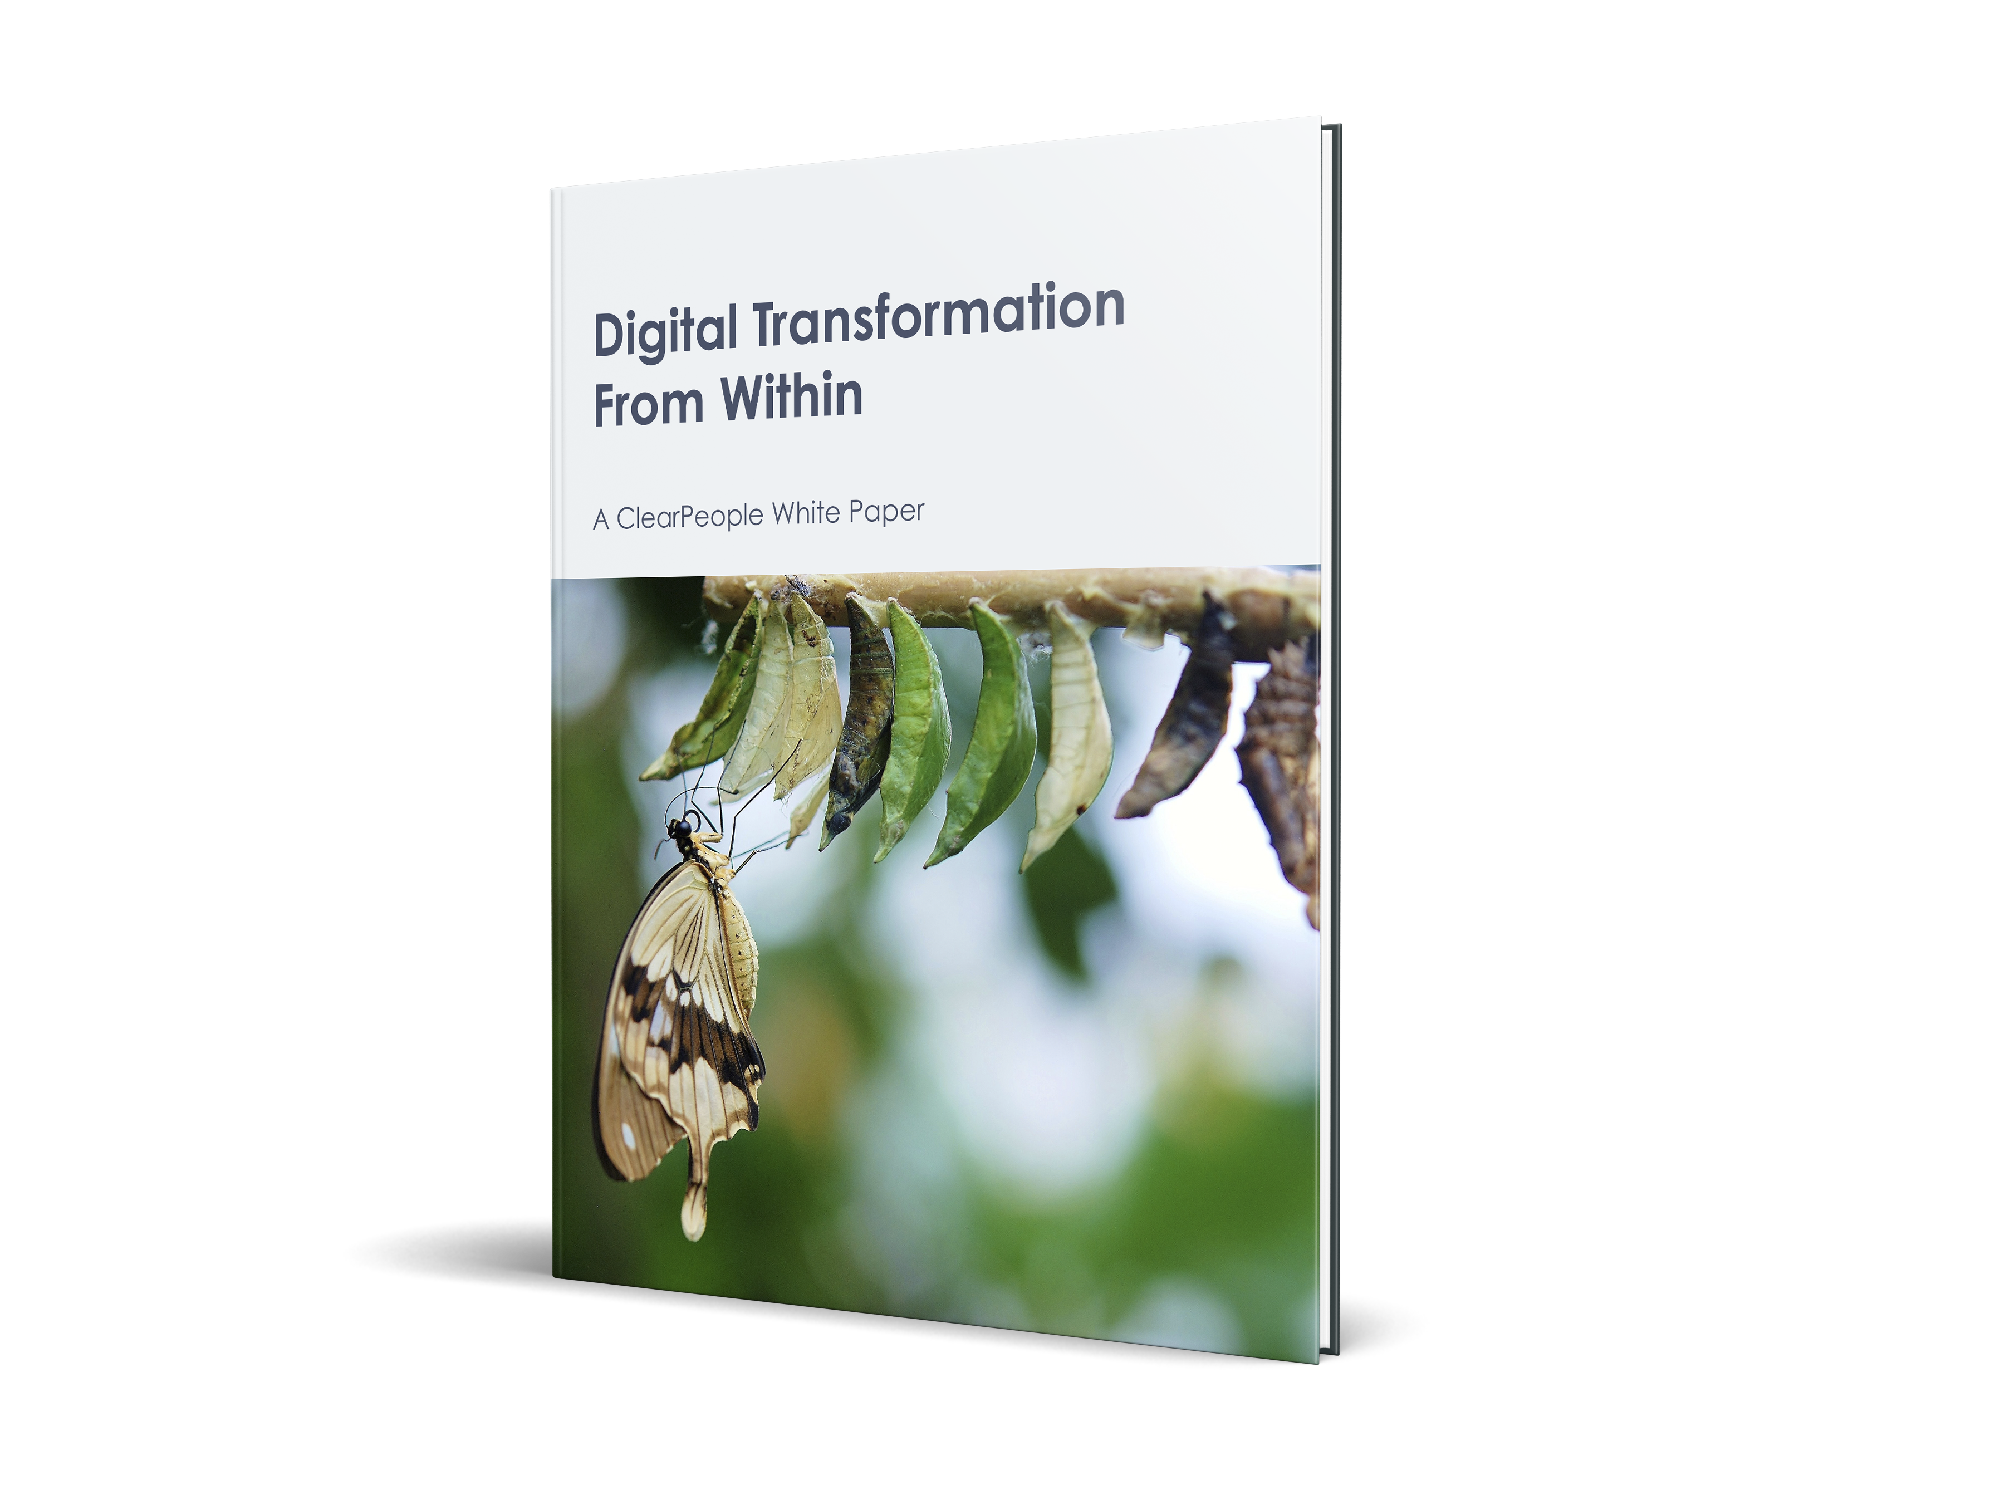 ClearPeople White Paper Accelerating digital transformation from within